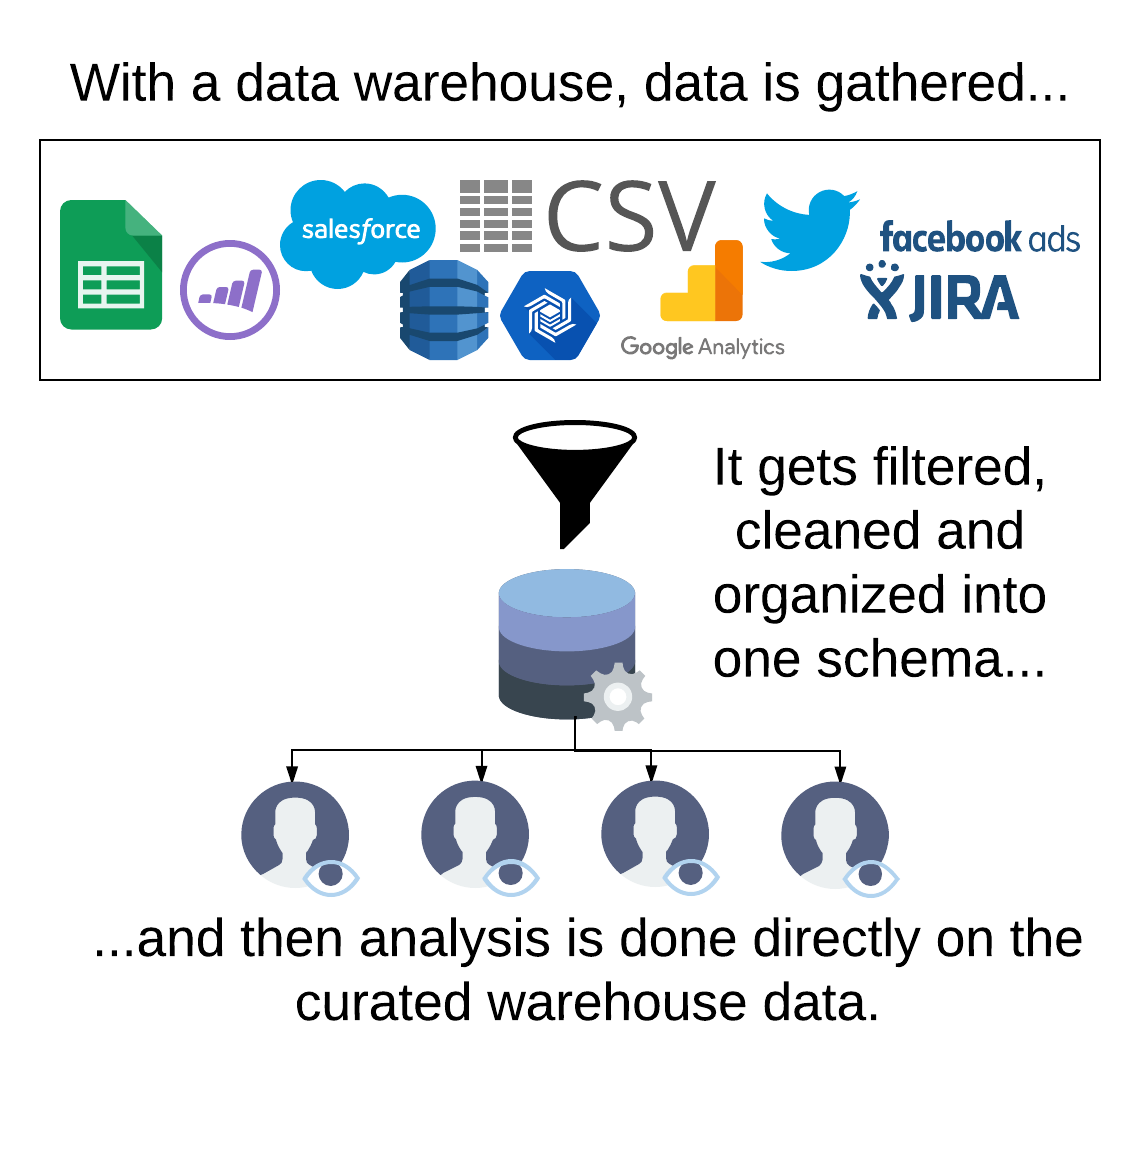 With a data warehouse, data is gathered from various sources. It gets filtered, cleaned and organized into one schema; then analysis is done directly on the curated warehouse data